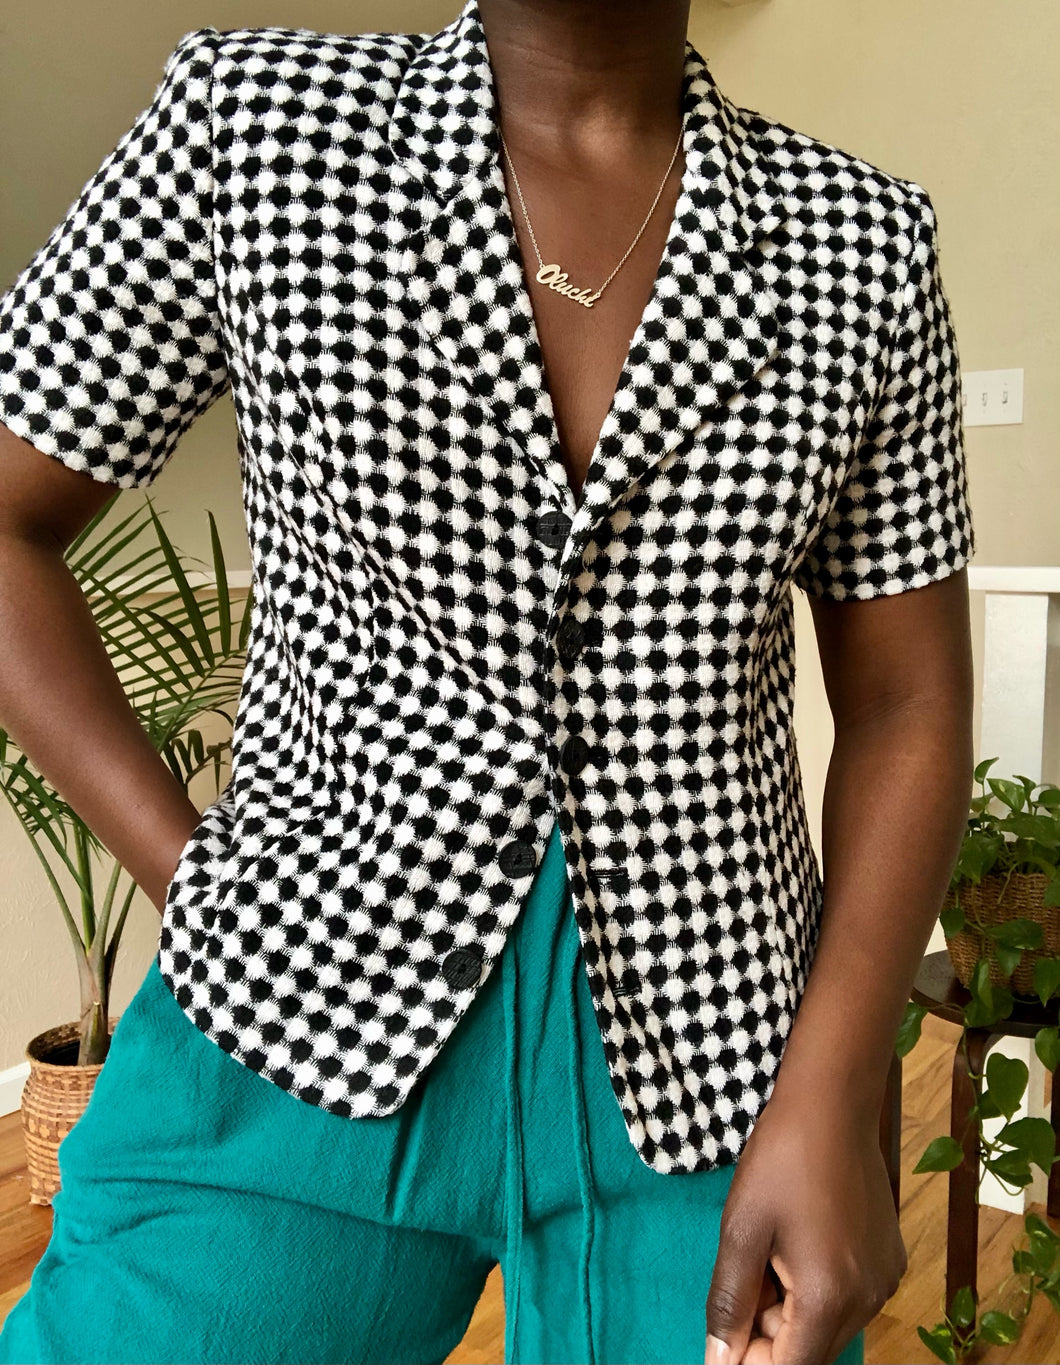 b&w checkered structured top